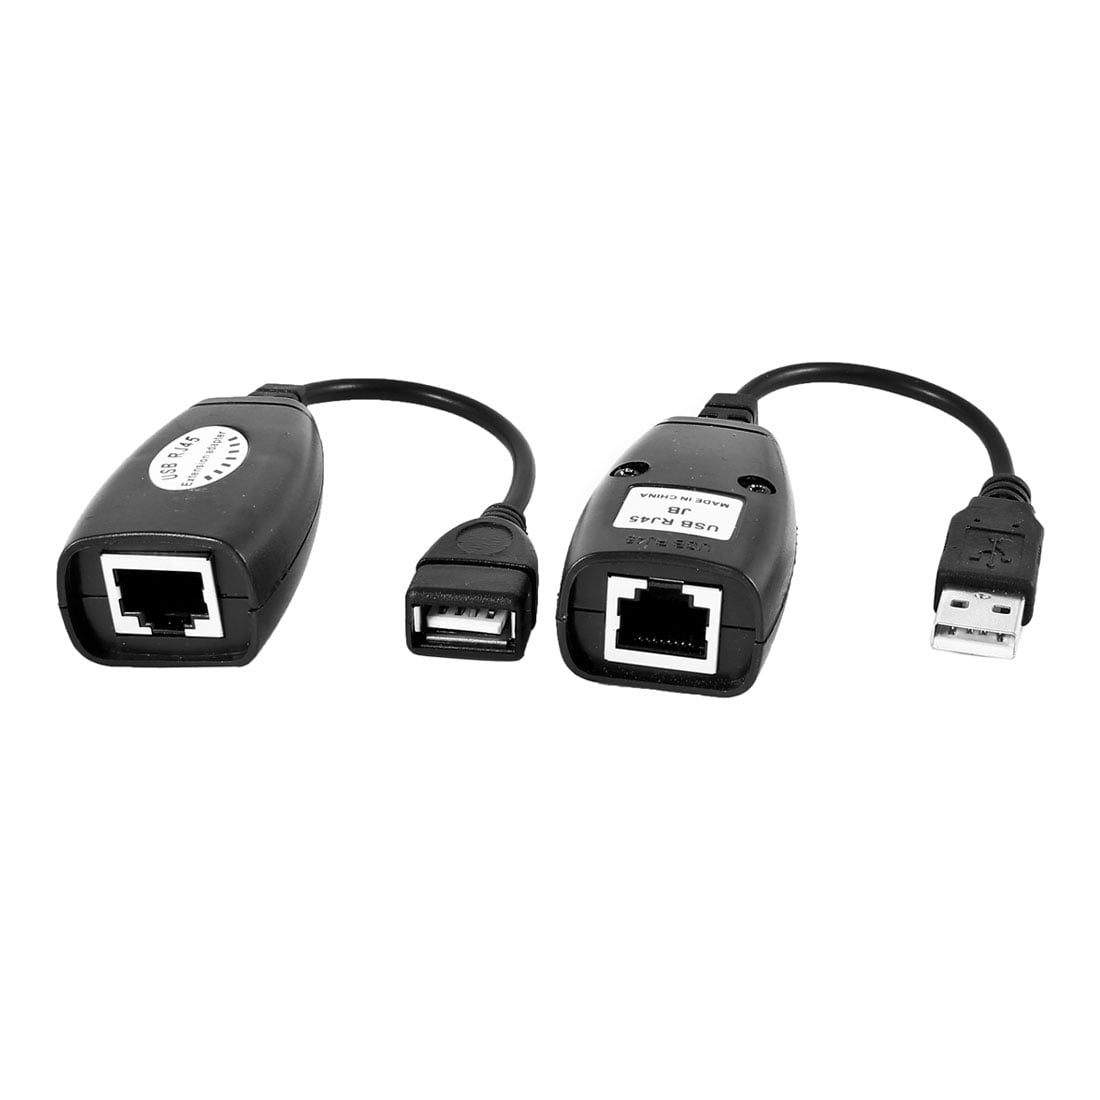 2 Pcs CAT5 Cat5e Cat6 RJ45 USB Extension Extender Adapter Cable up to .